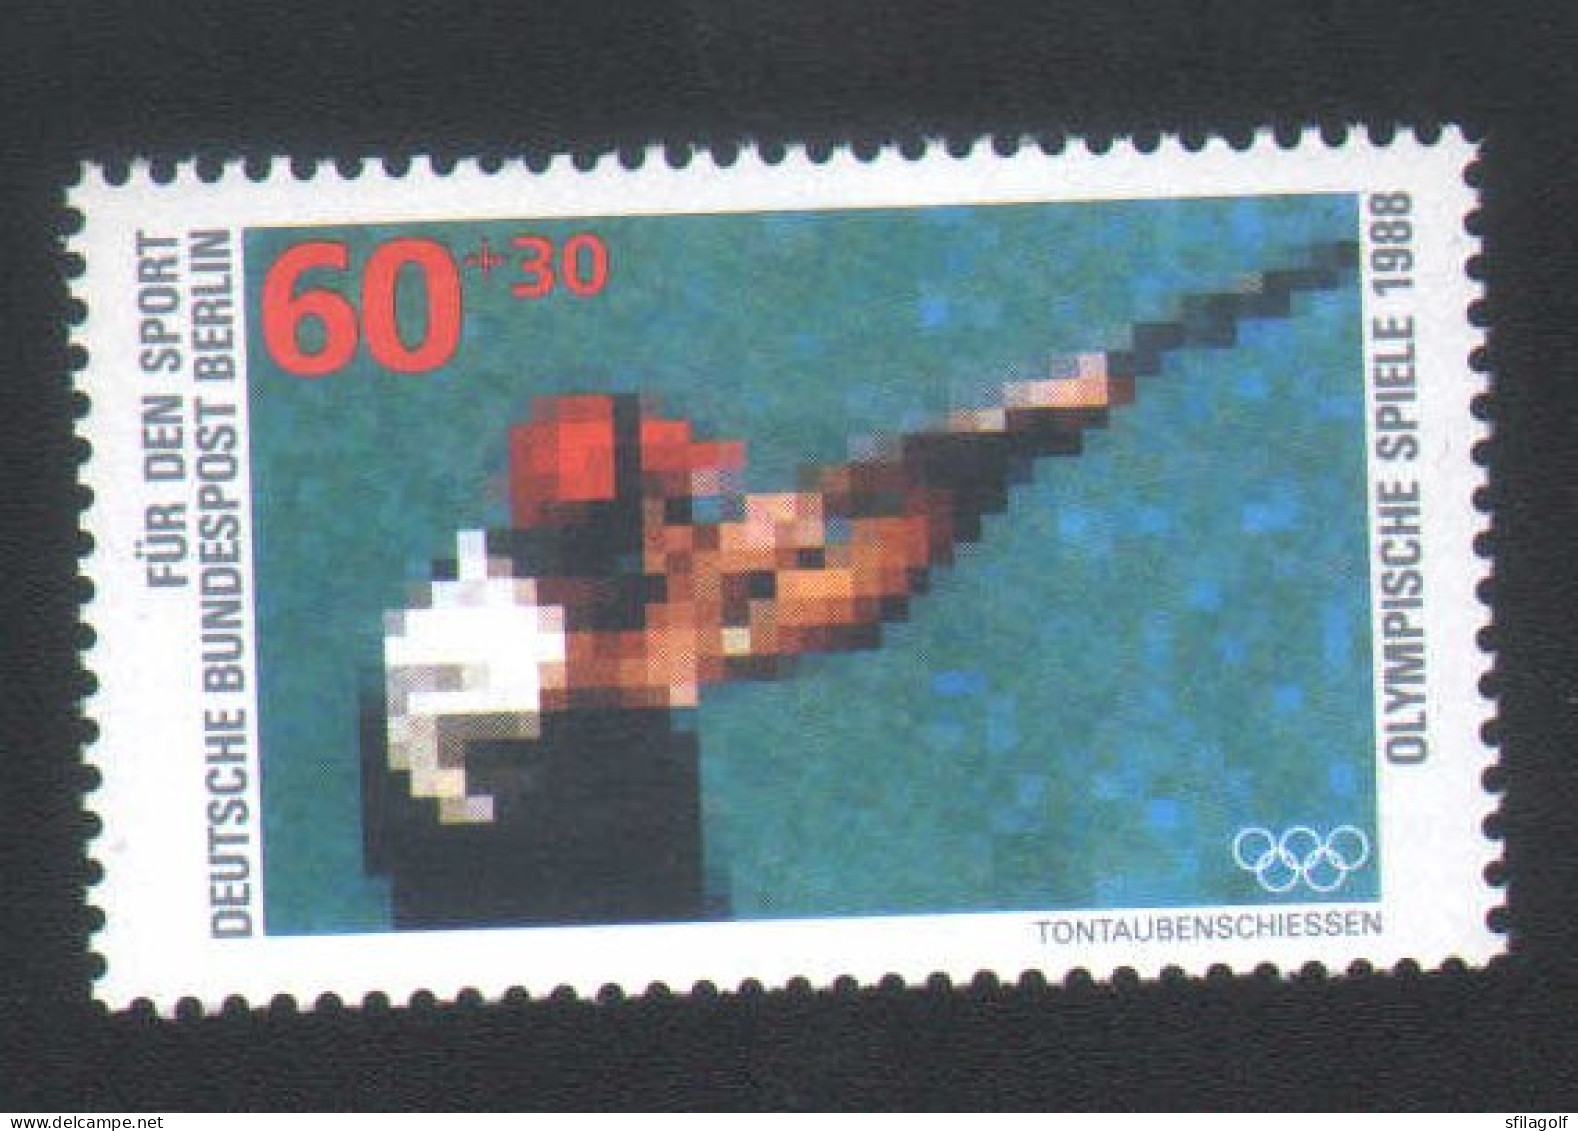 Allemagne - Germany - 1988 - Tir - Shooting - Jeux Olympiques - Olympic Games - Neuf - Mint - Tir (Armes)